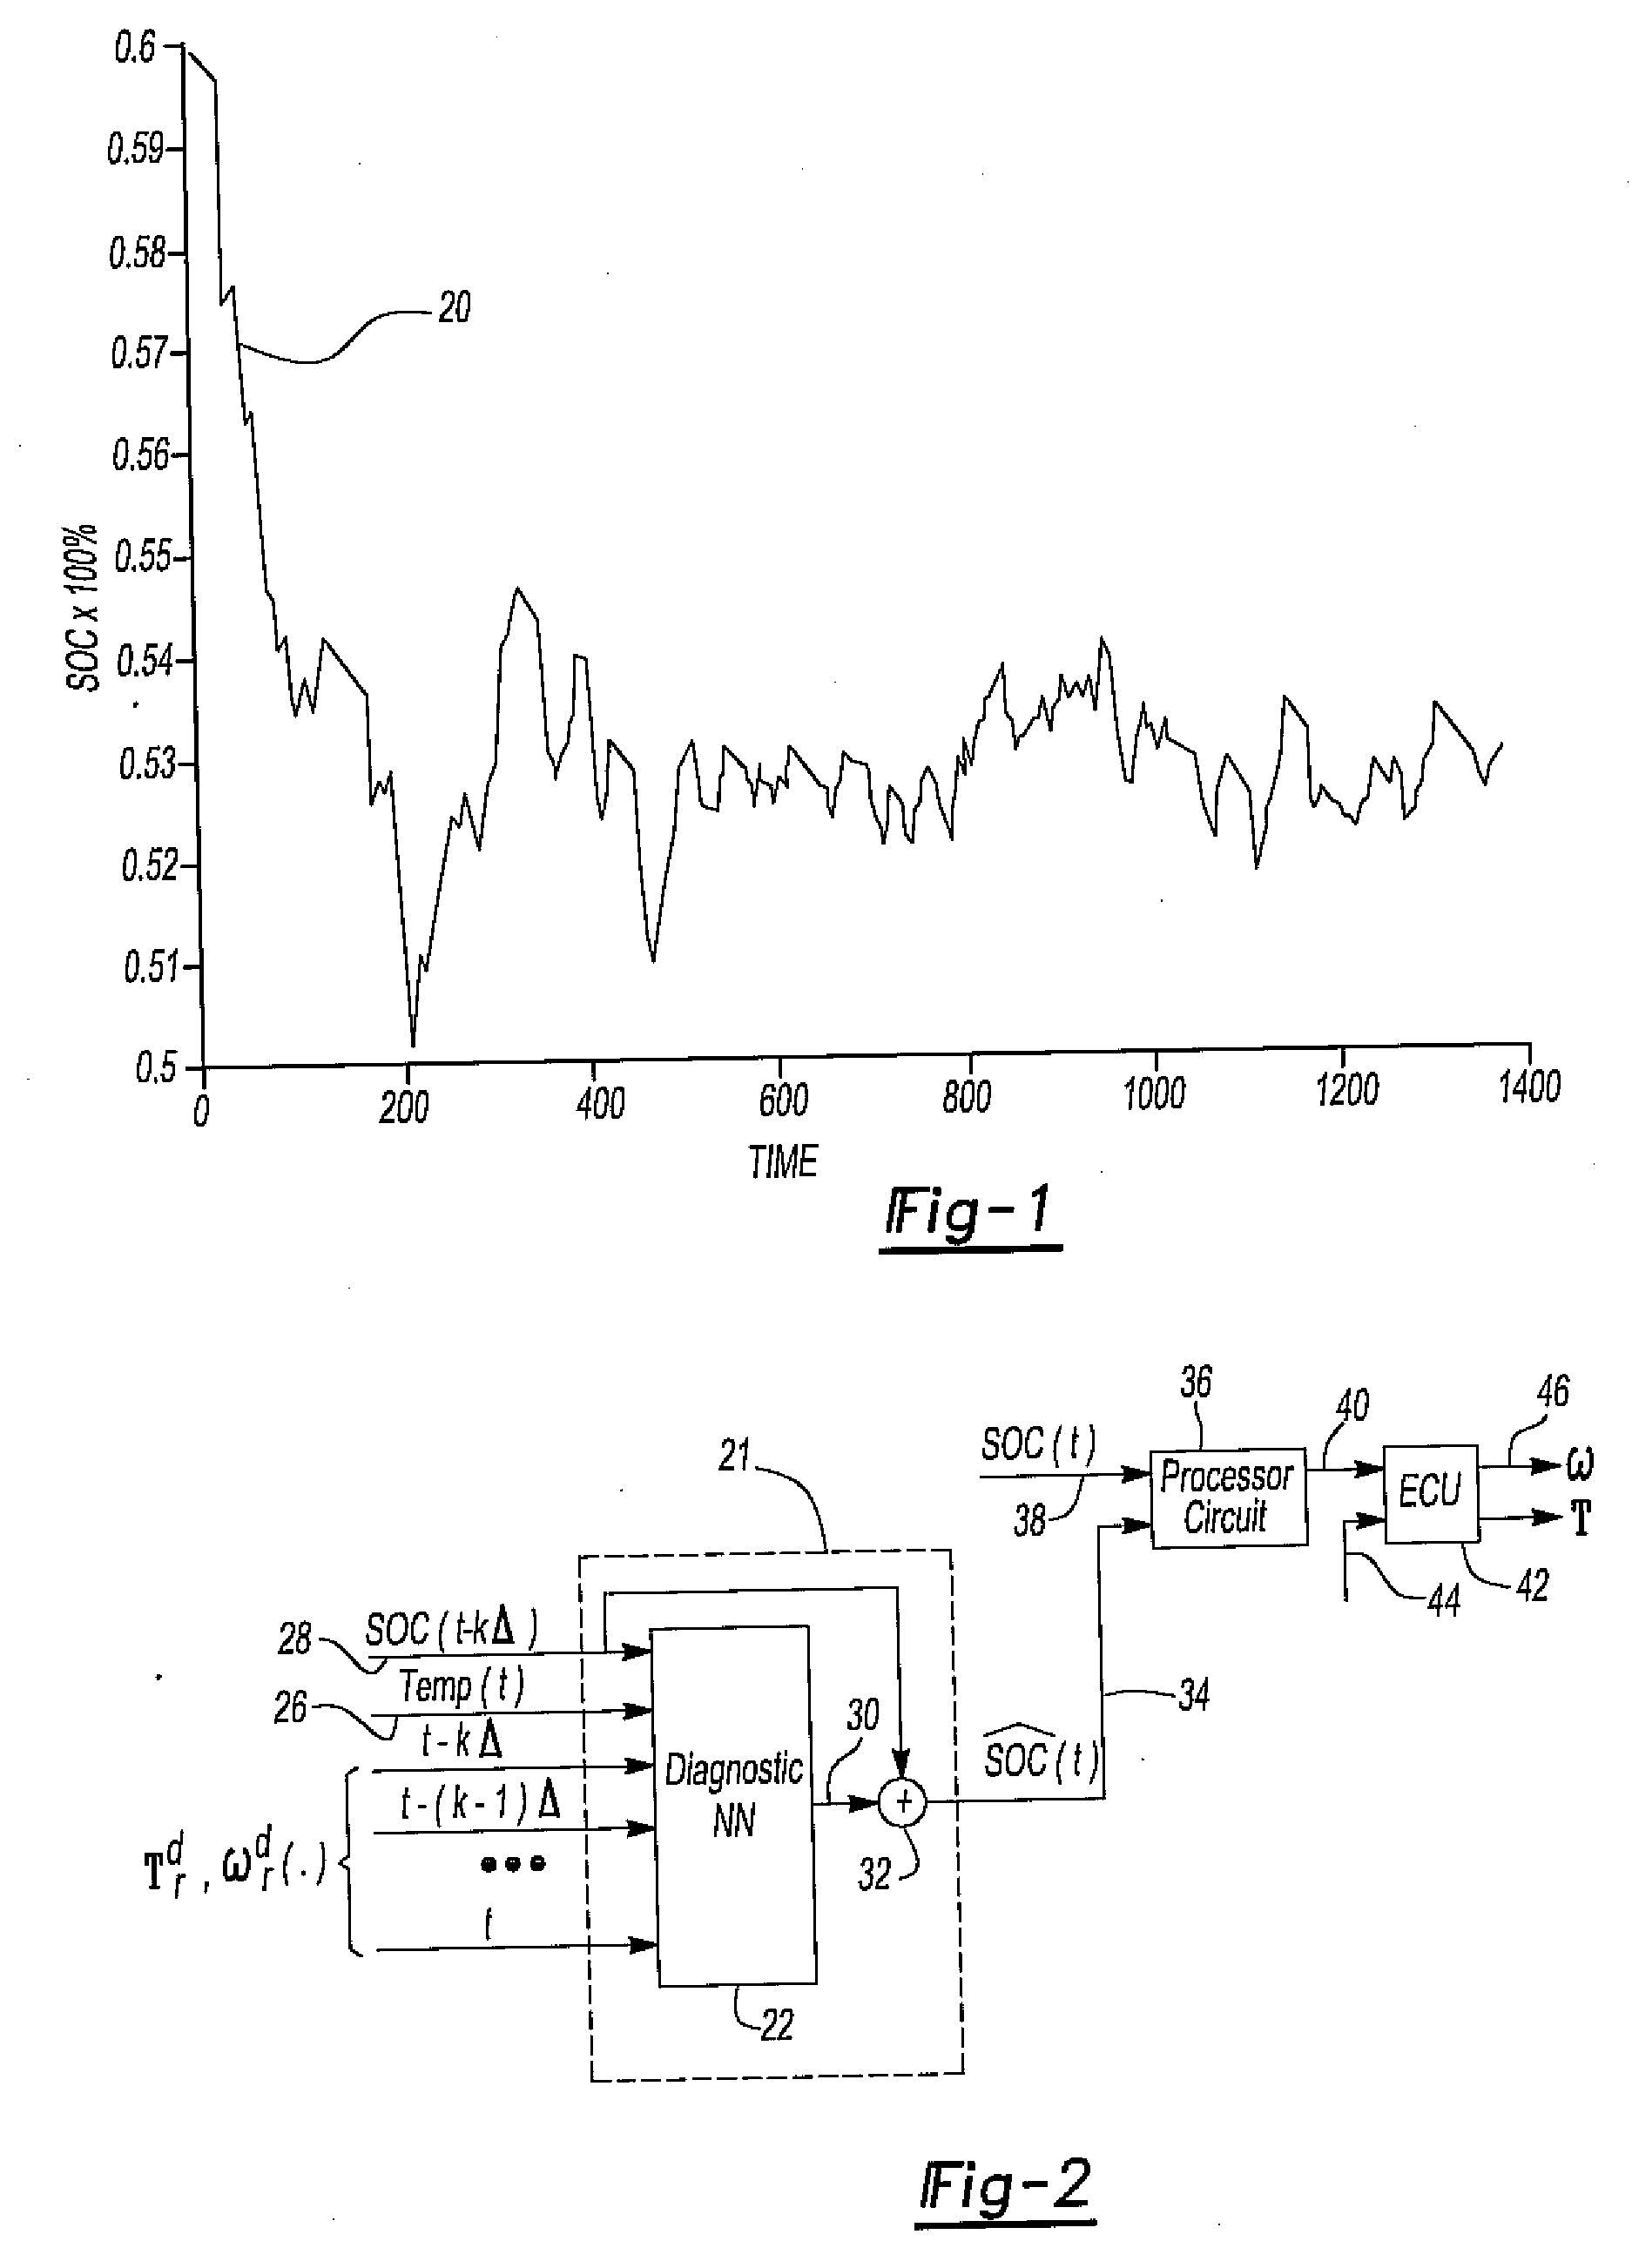 System for detecting a battery malfunction and performing battery mitigation for an hev